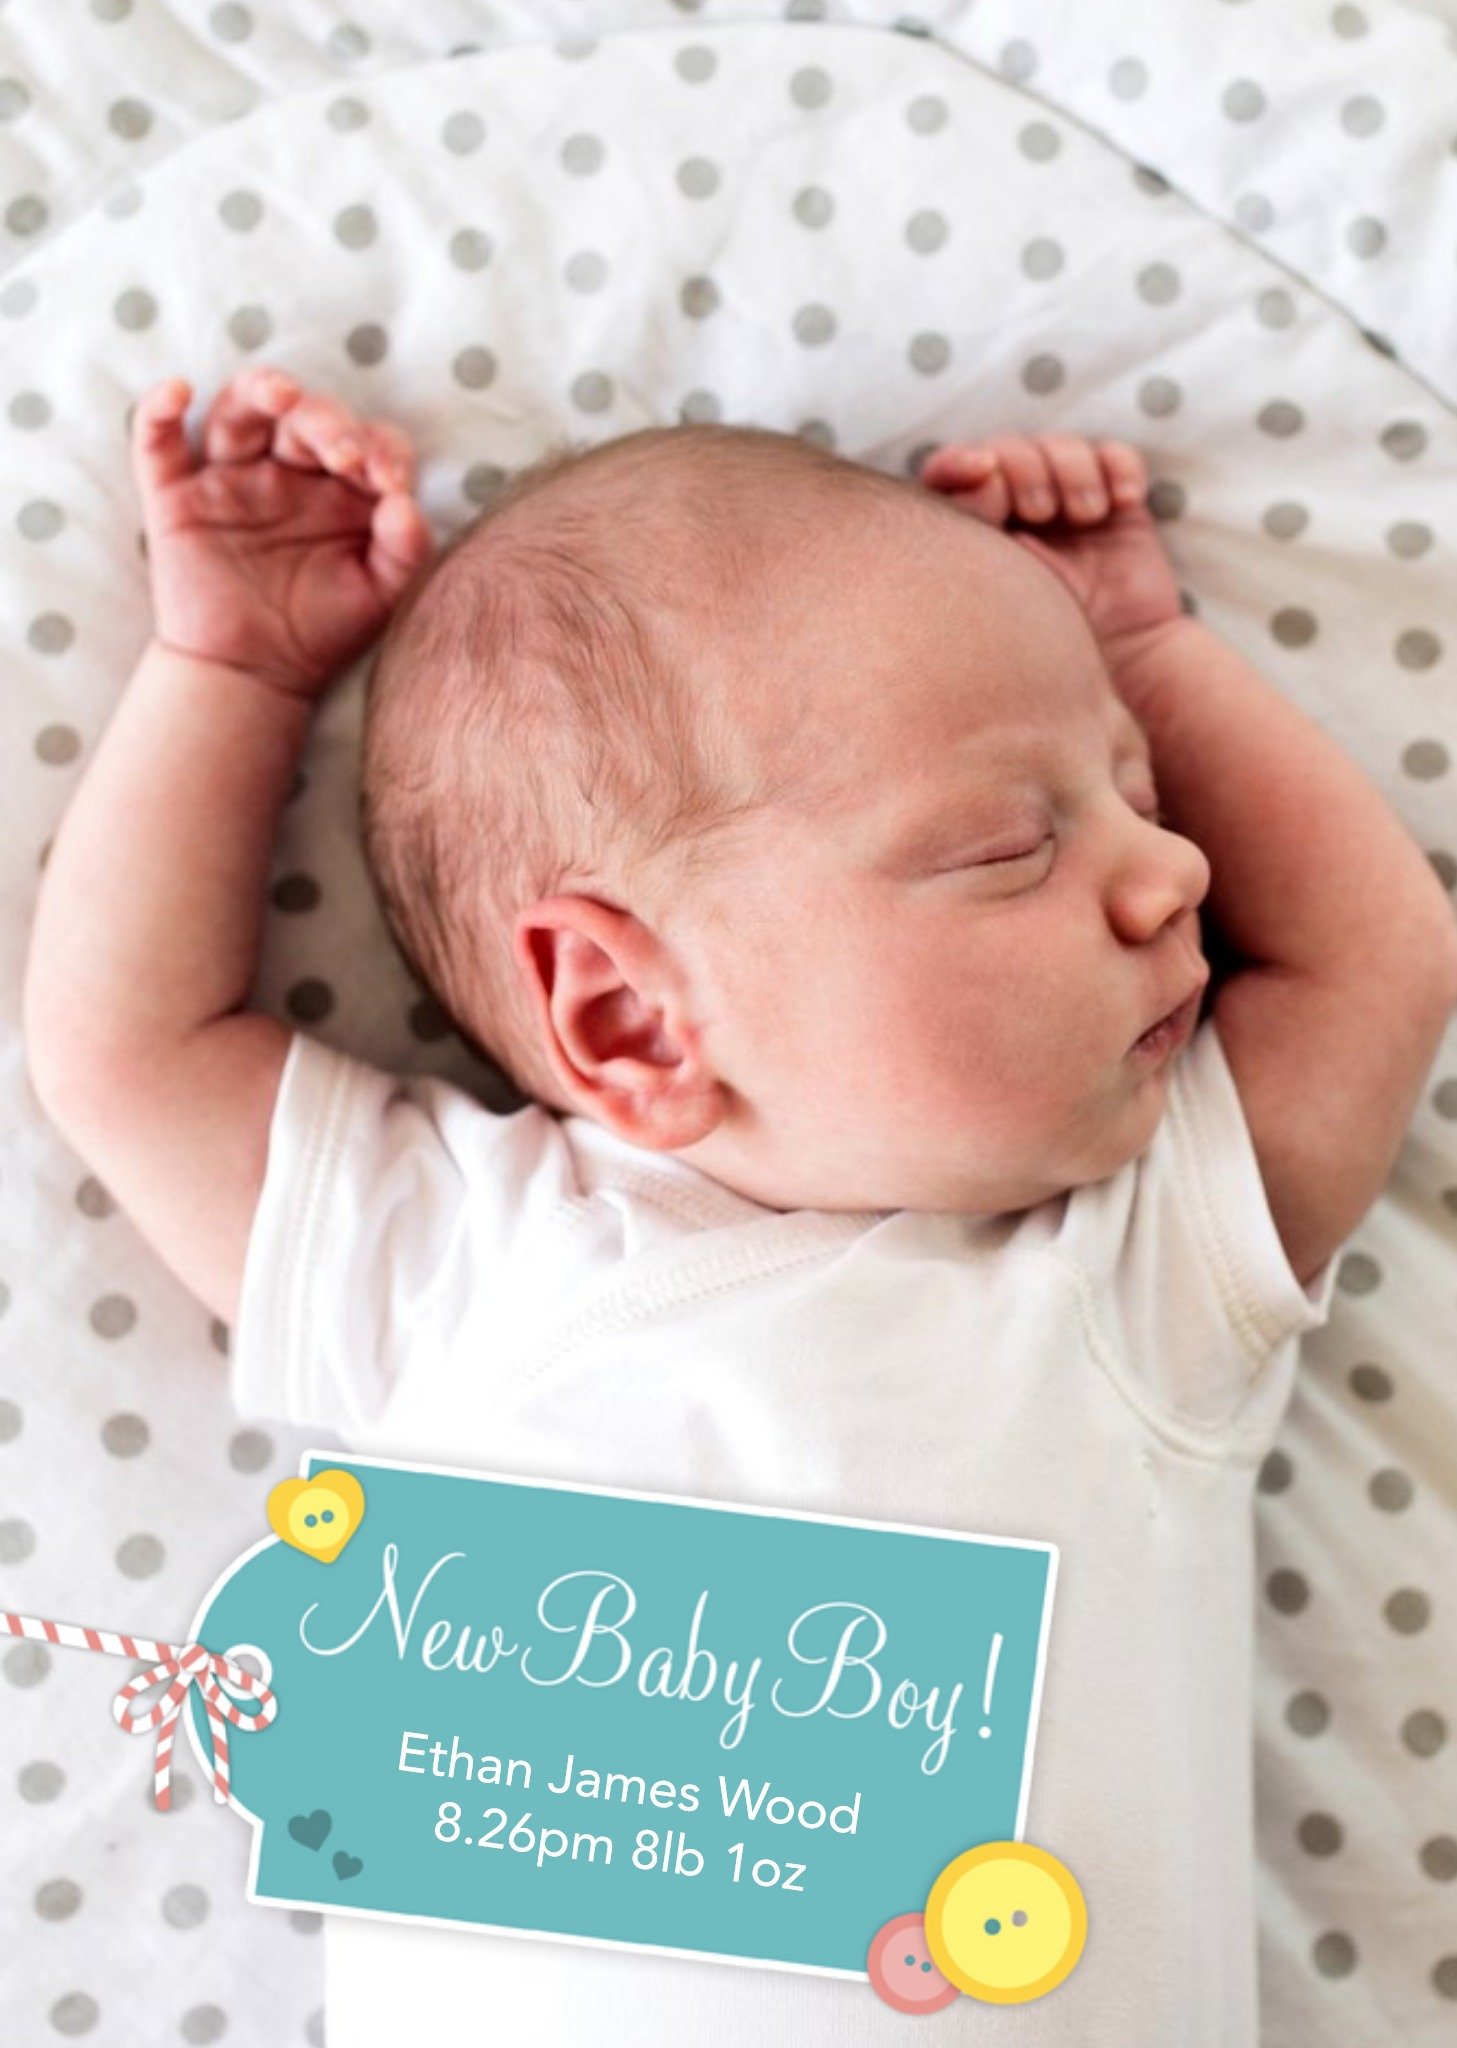 Moonpig New Baby Boy Personalised Photo Upload Baby Announcement Card, Large